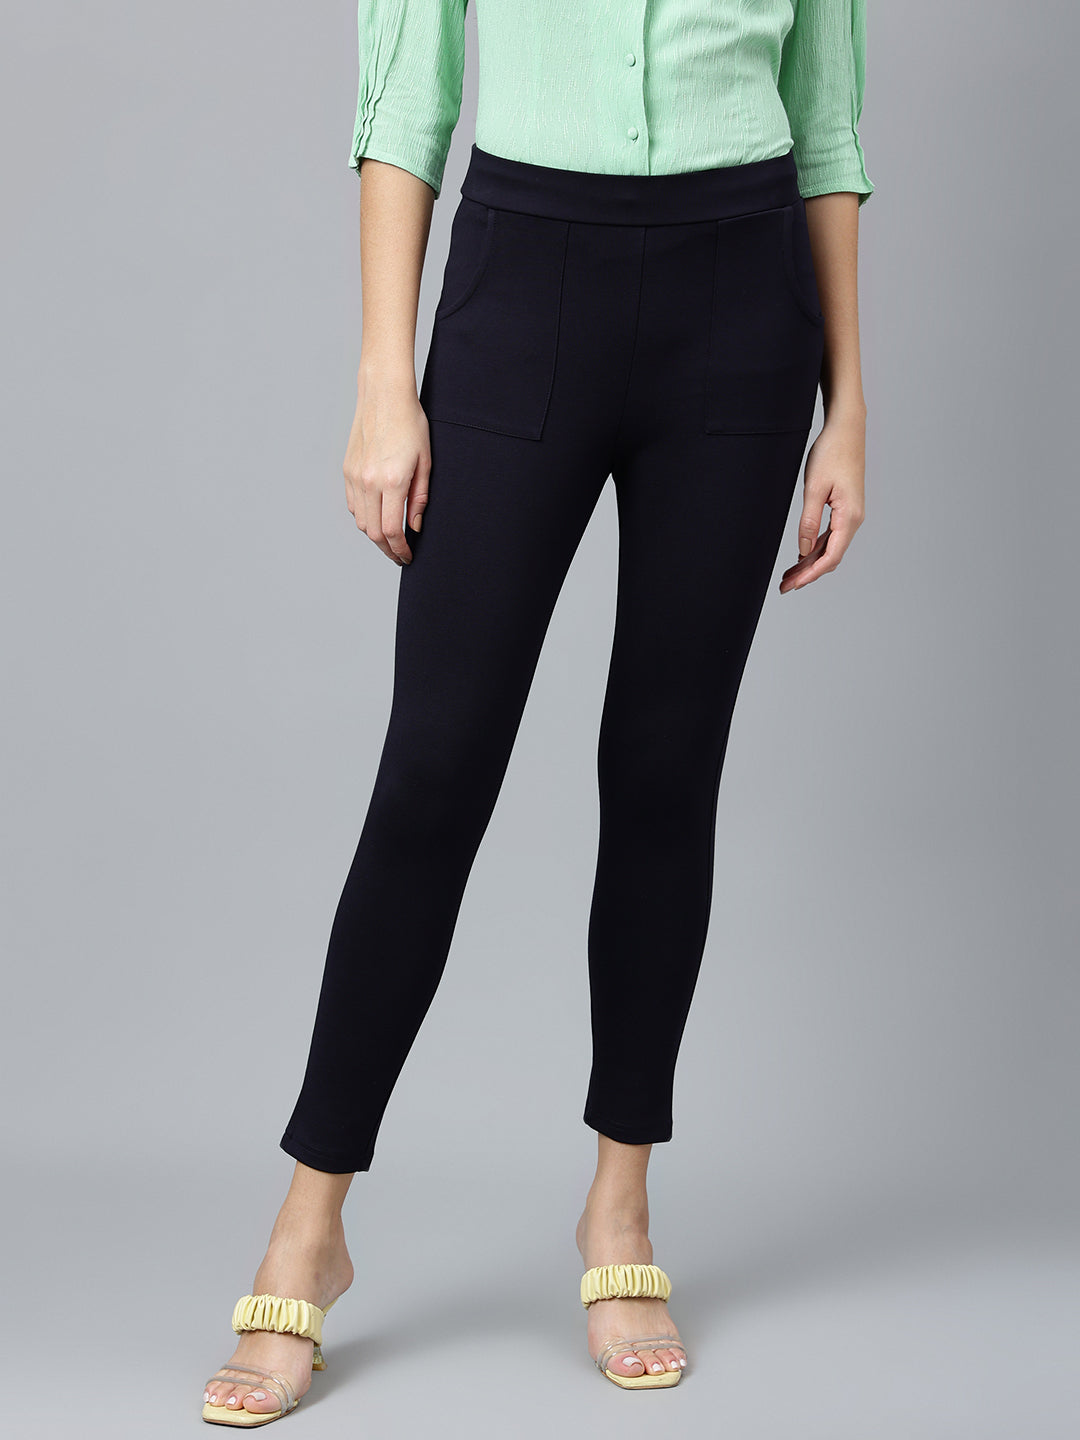 Blue Navy Solid Casual Legging